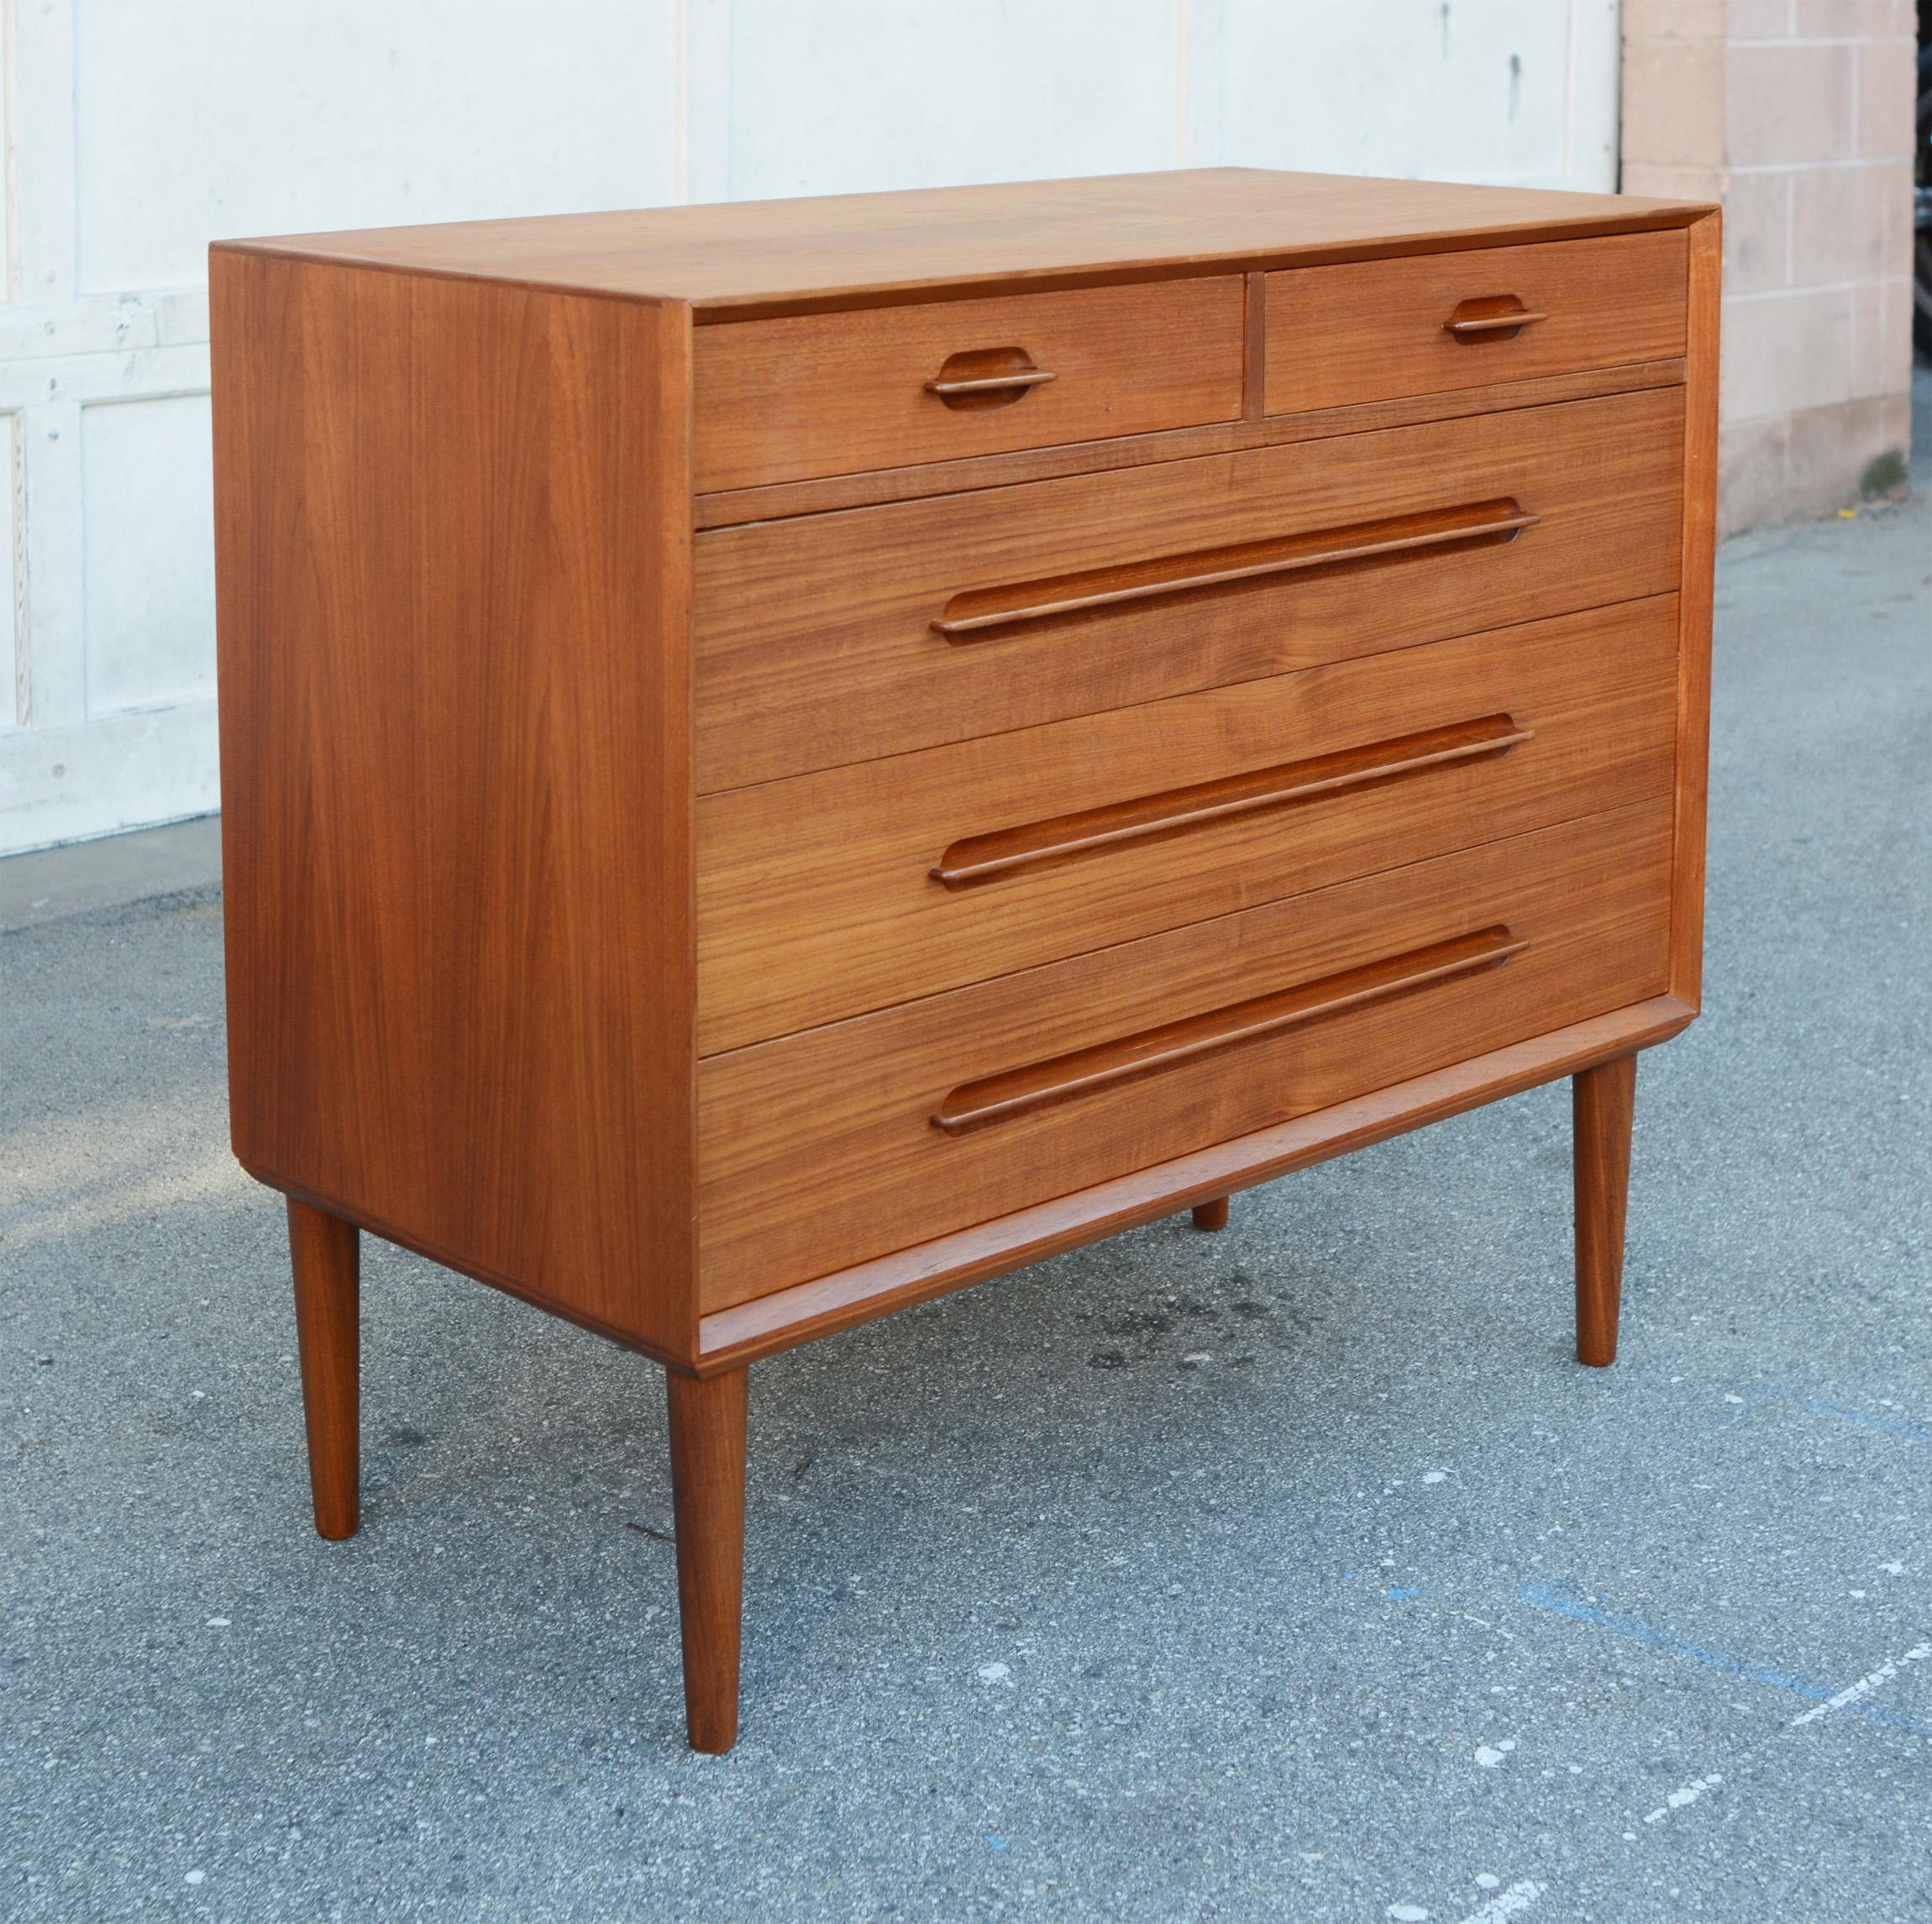 Small chest of drawers designed by Ejvind A. Johansson for Gern Mobelfabrik. The five drawers feature an unique handle design. This has been cleaned and oiled and the top lightly refinished.